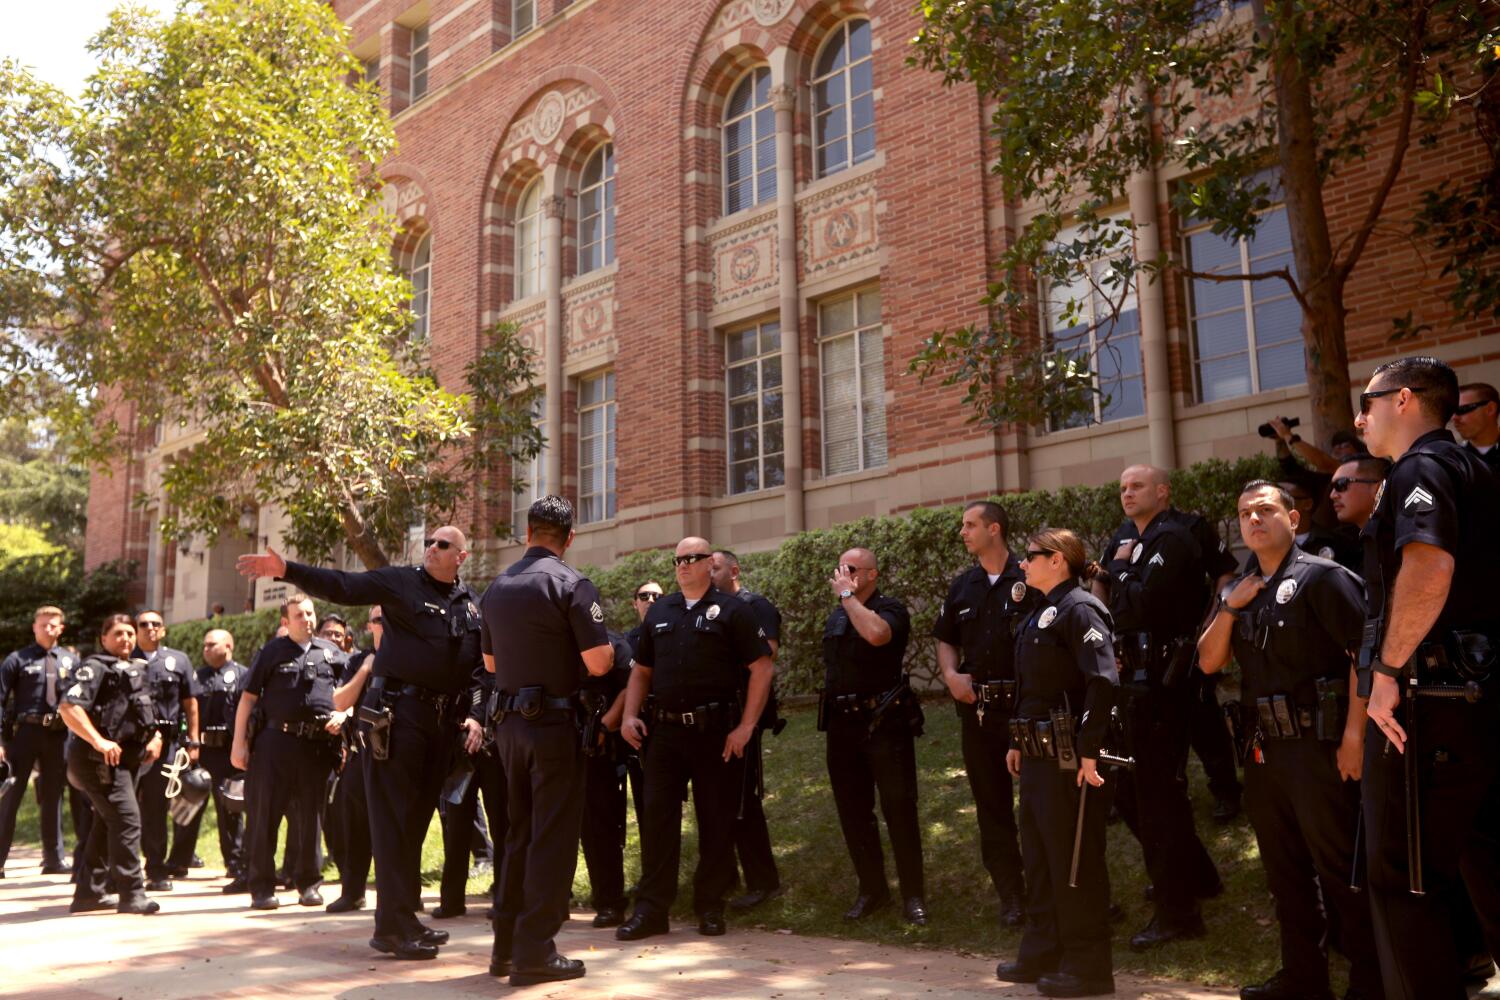 Days before violence, UCLA sought extra police but then canceled requests, according to documents, union